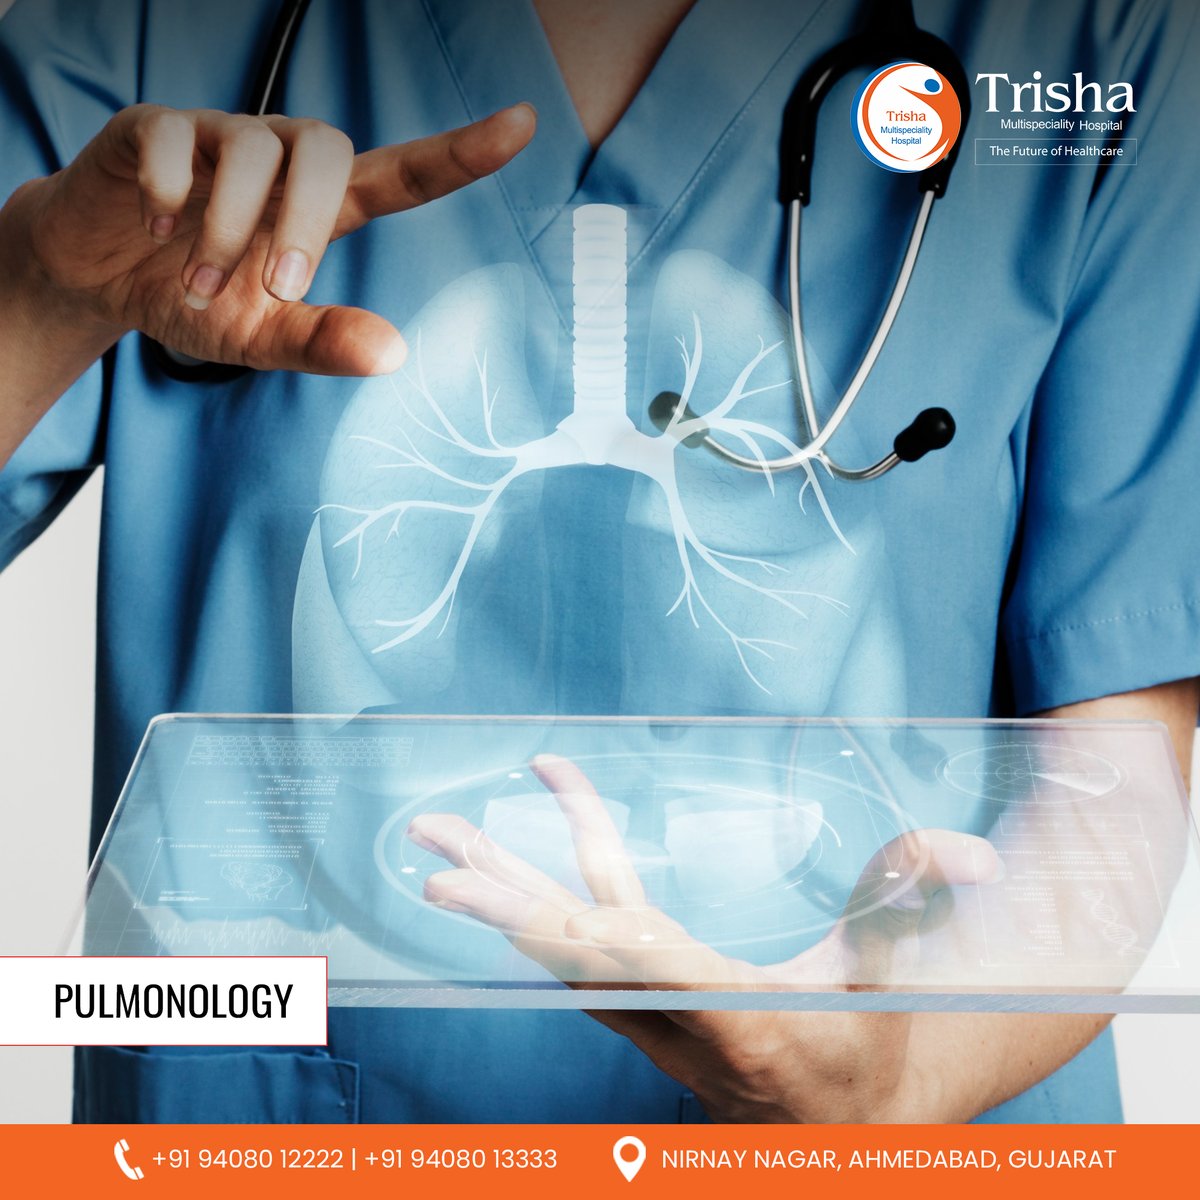 Breathe easy with Trisha Multispeciality Hospital's Pulmonology team!

Your partners in respiratory health, providing expert care and support.
.
.
.
[Health Center, Hospital, Respiratory Specialists]